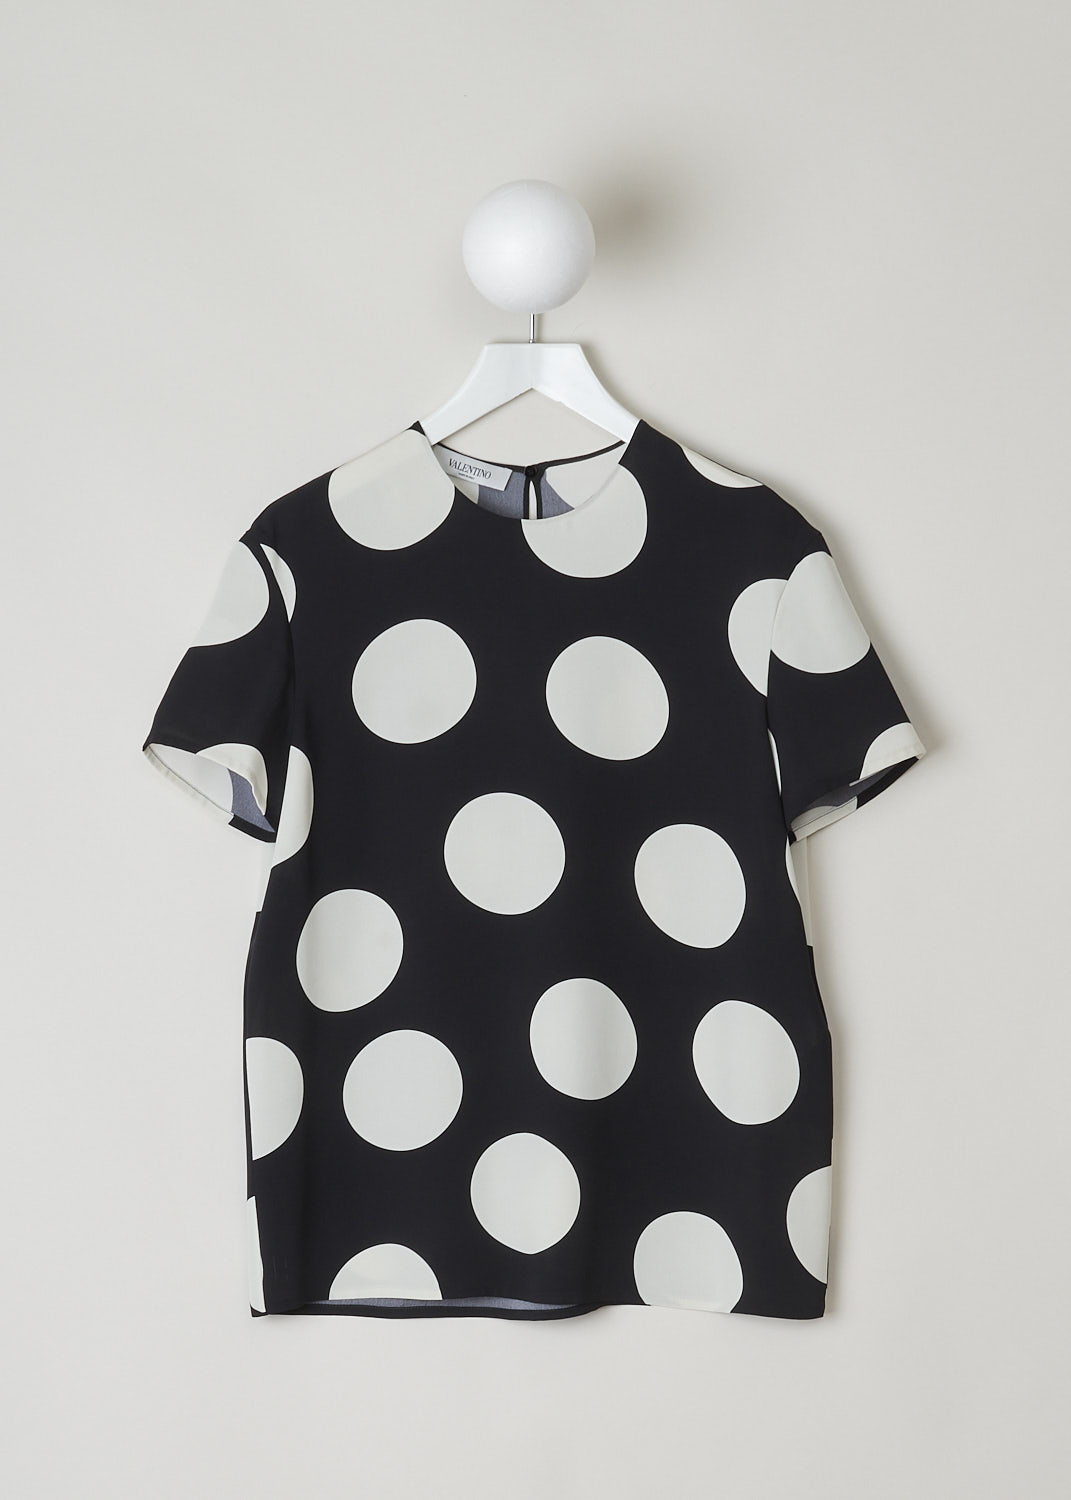 VALENTINO, BLACK TOP WITH BIG WHITE DOTS, VB3AE5P5661_0NA, Black, White, Print, Front, This boxy silk top has a black base with a big dotted print in white.  The top has a high, round neckline and short sleeves. In the back, a single button with keyhole functions as the closure option. The top has a wider silhouette.
